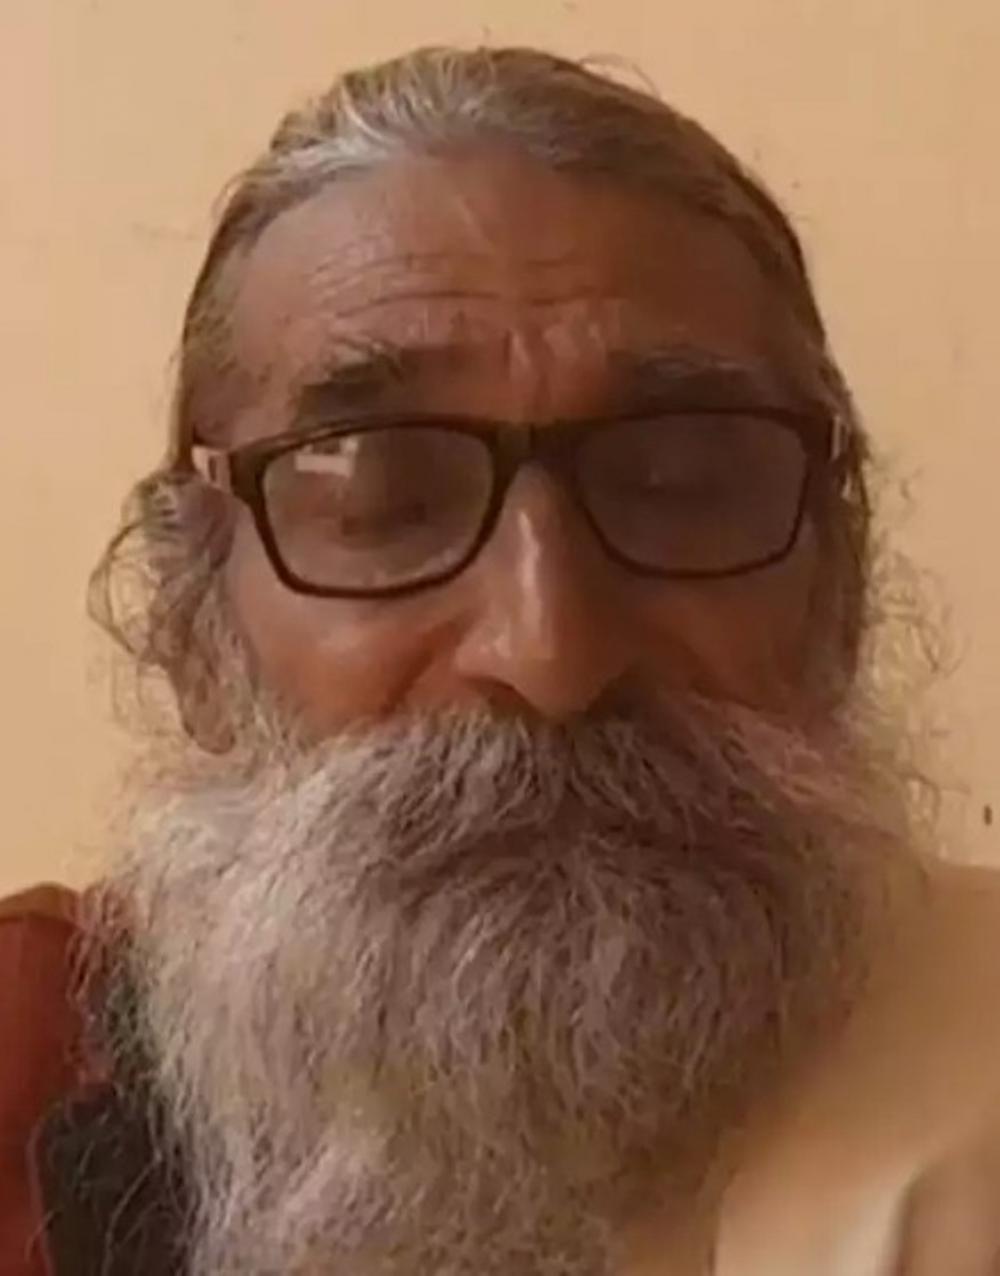 The Weekend Leader - 'Falahari Baba' to Break His Fast Three Decades After Vow For Ram Temple